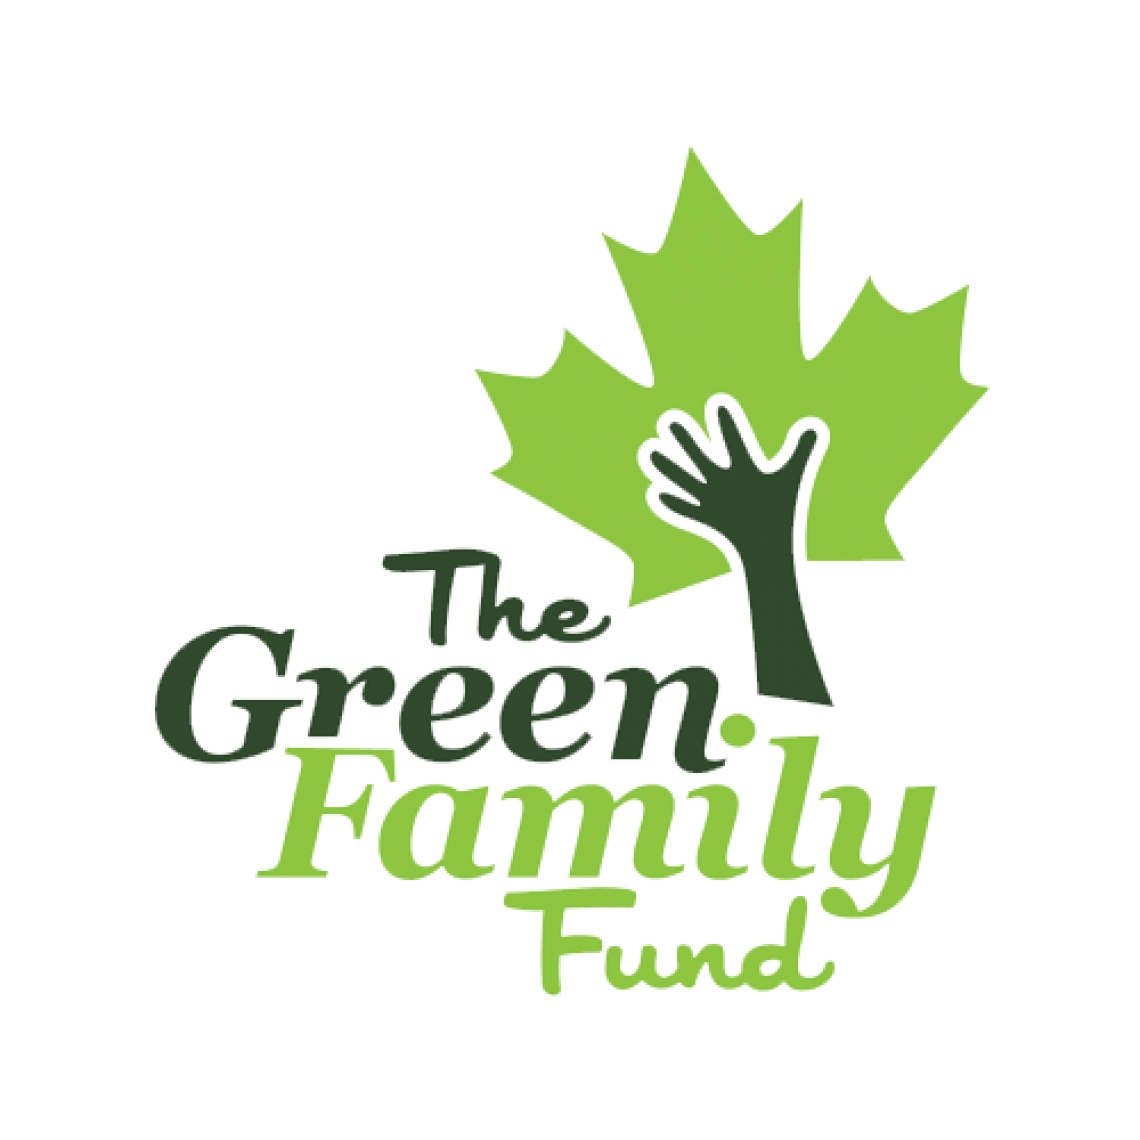 The Green Family Fund